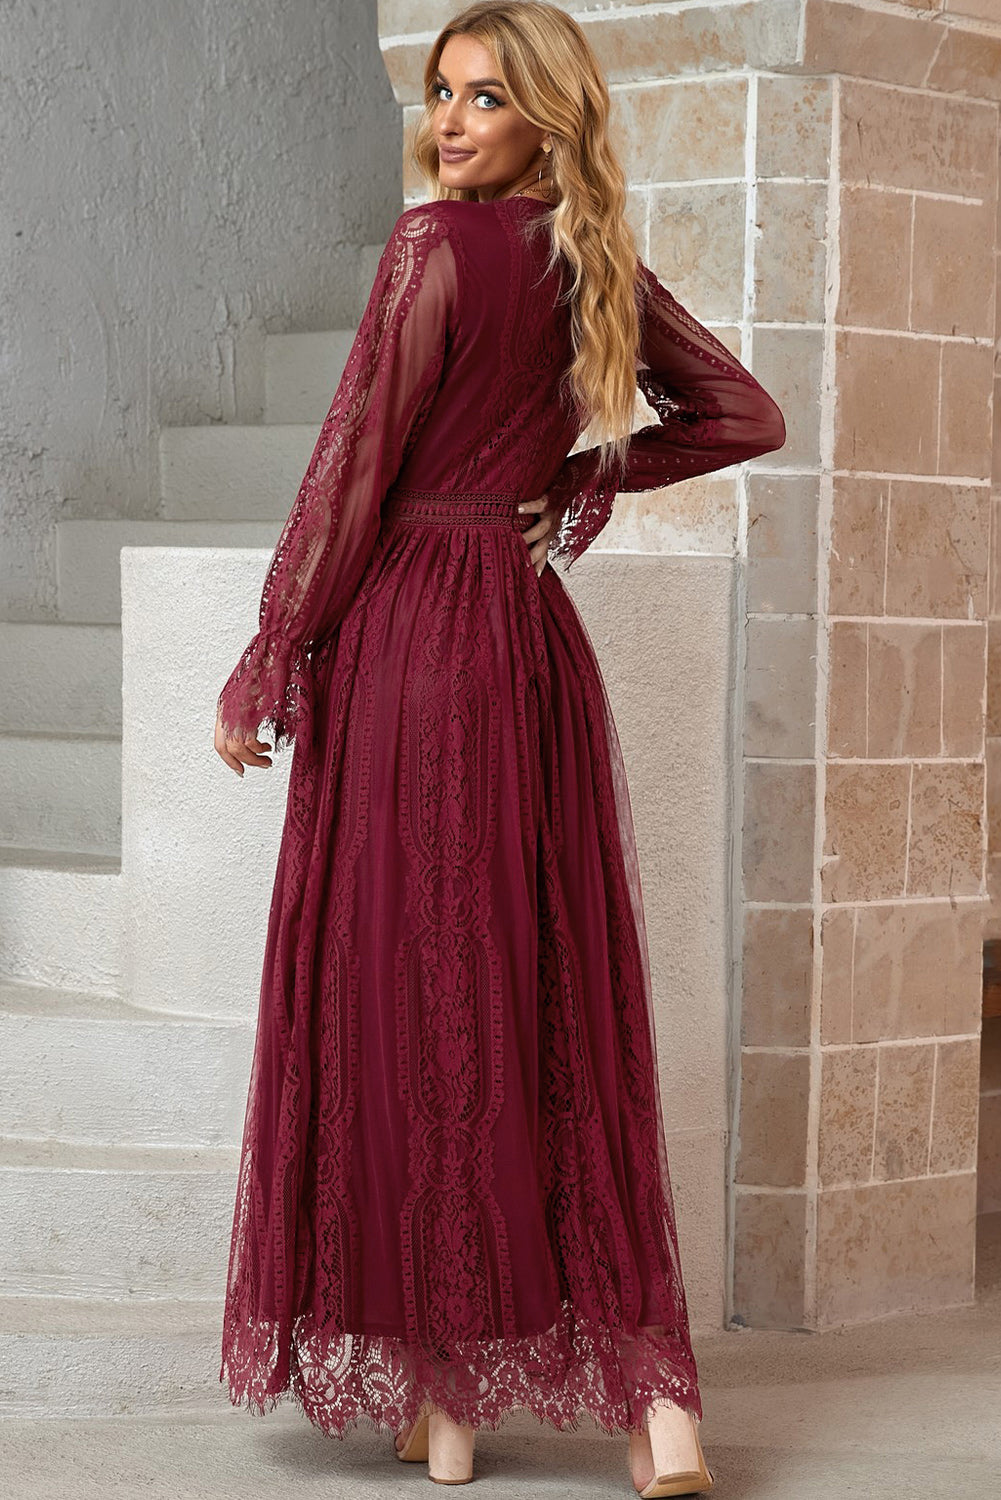 Scalloped Lace Maxi Dress in Wine and White